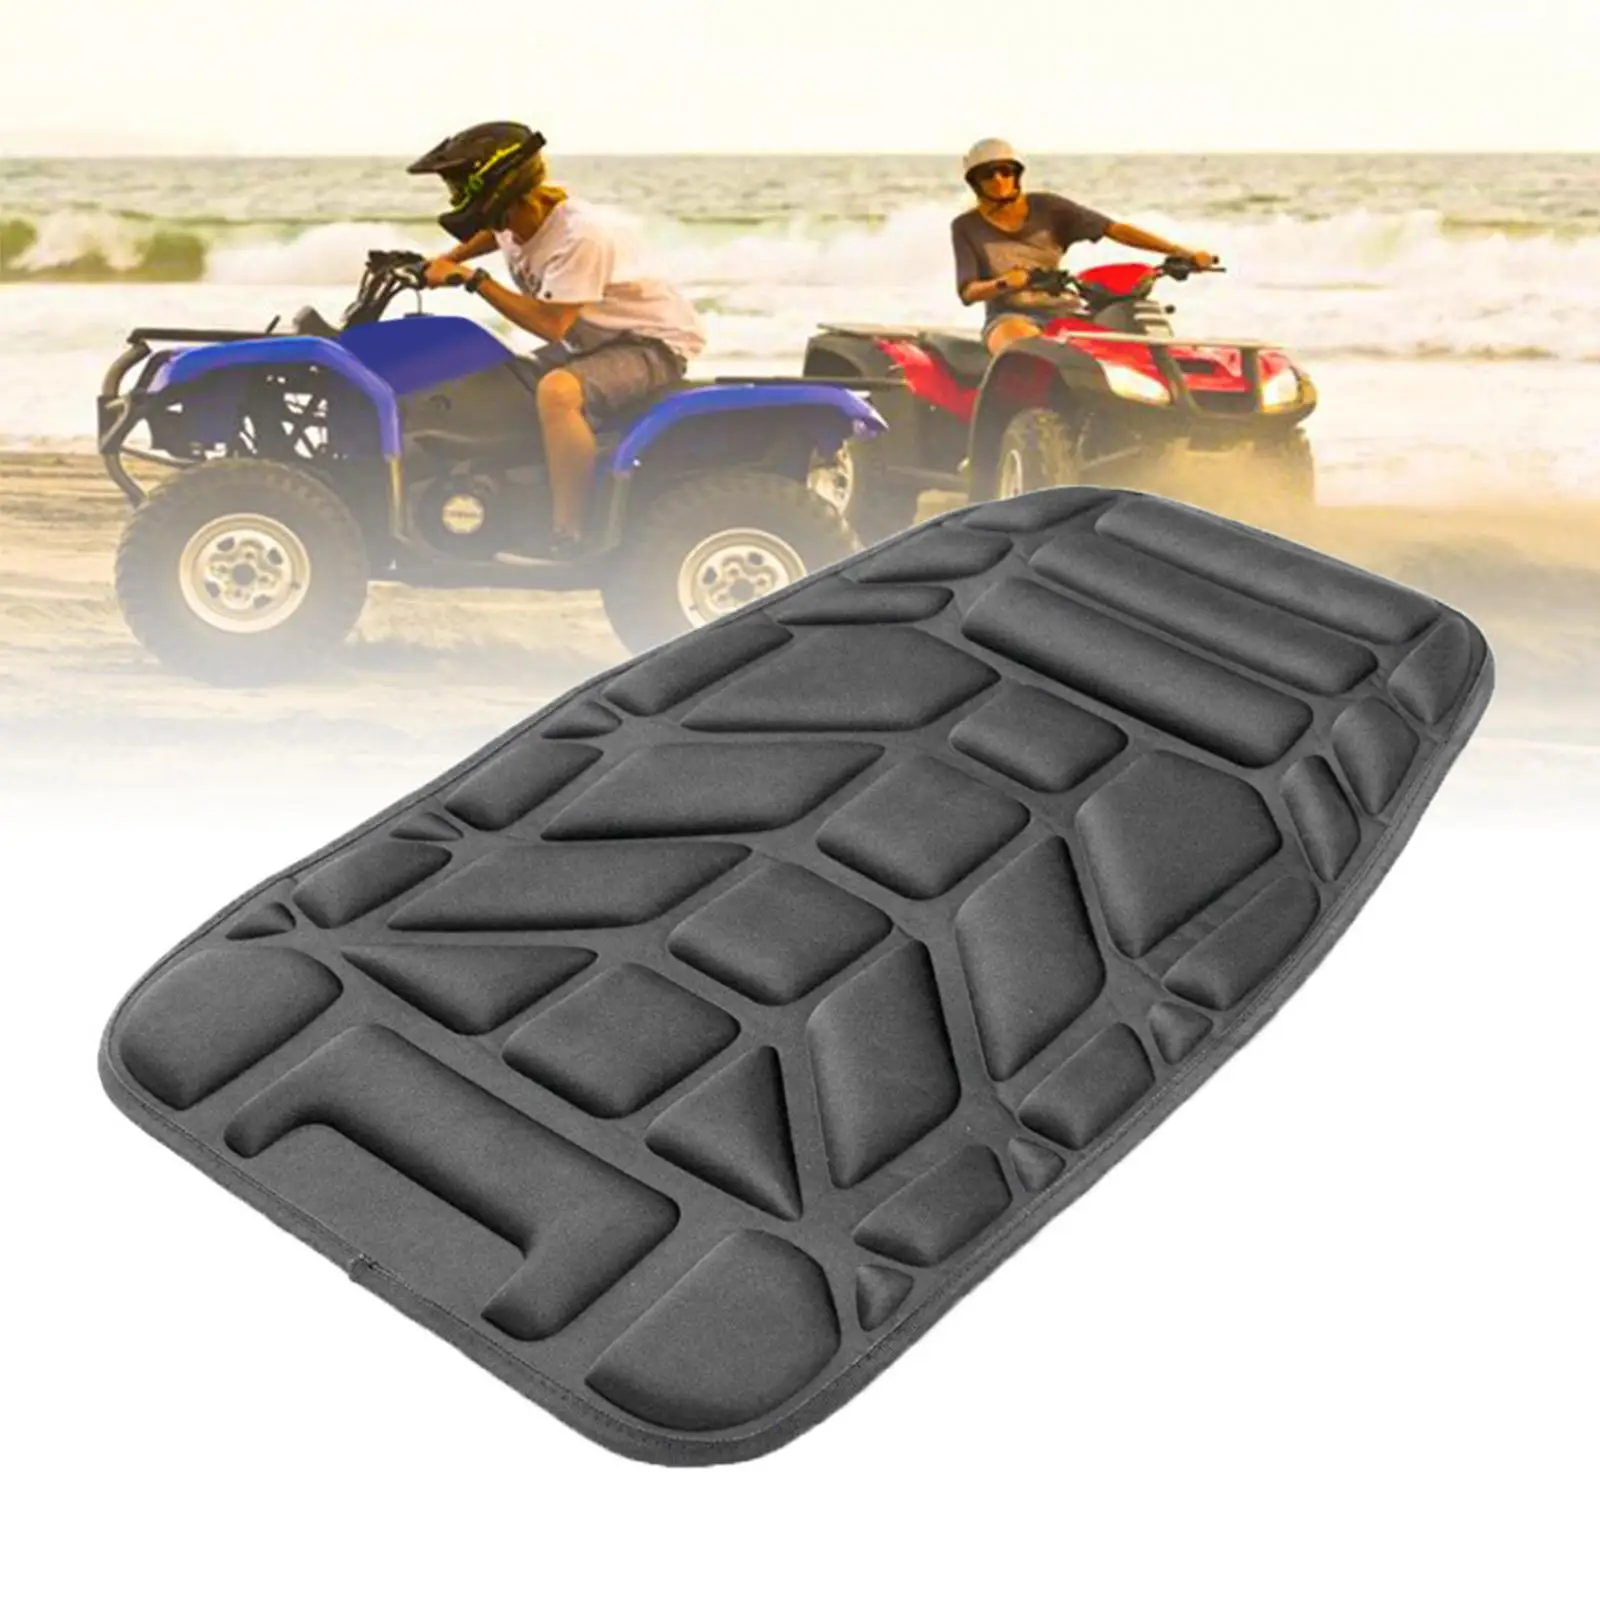 Motorcycle Cushion Protector Sunscreen Adjustable 3D Saddle Pad for ATV